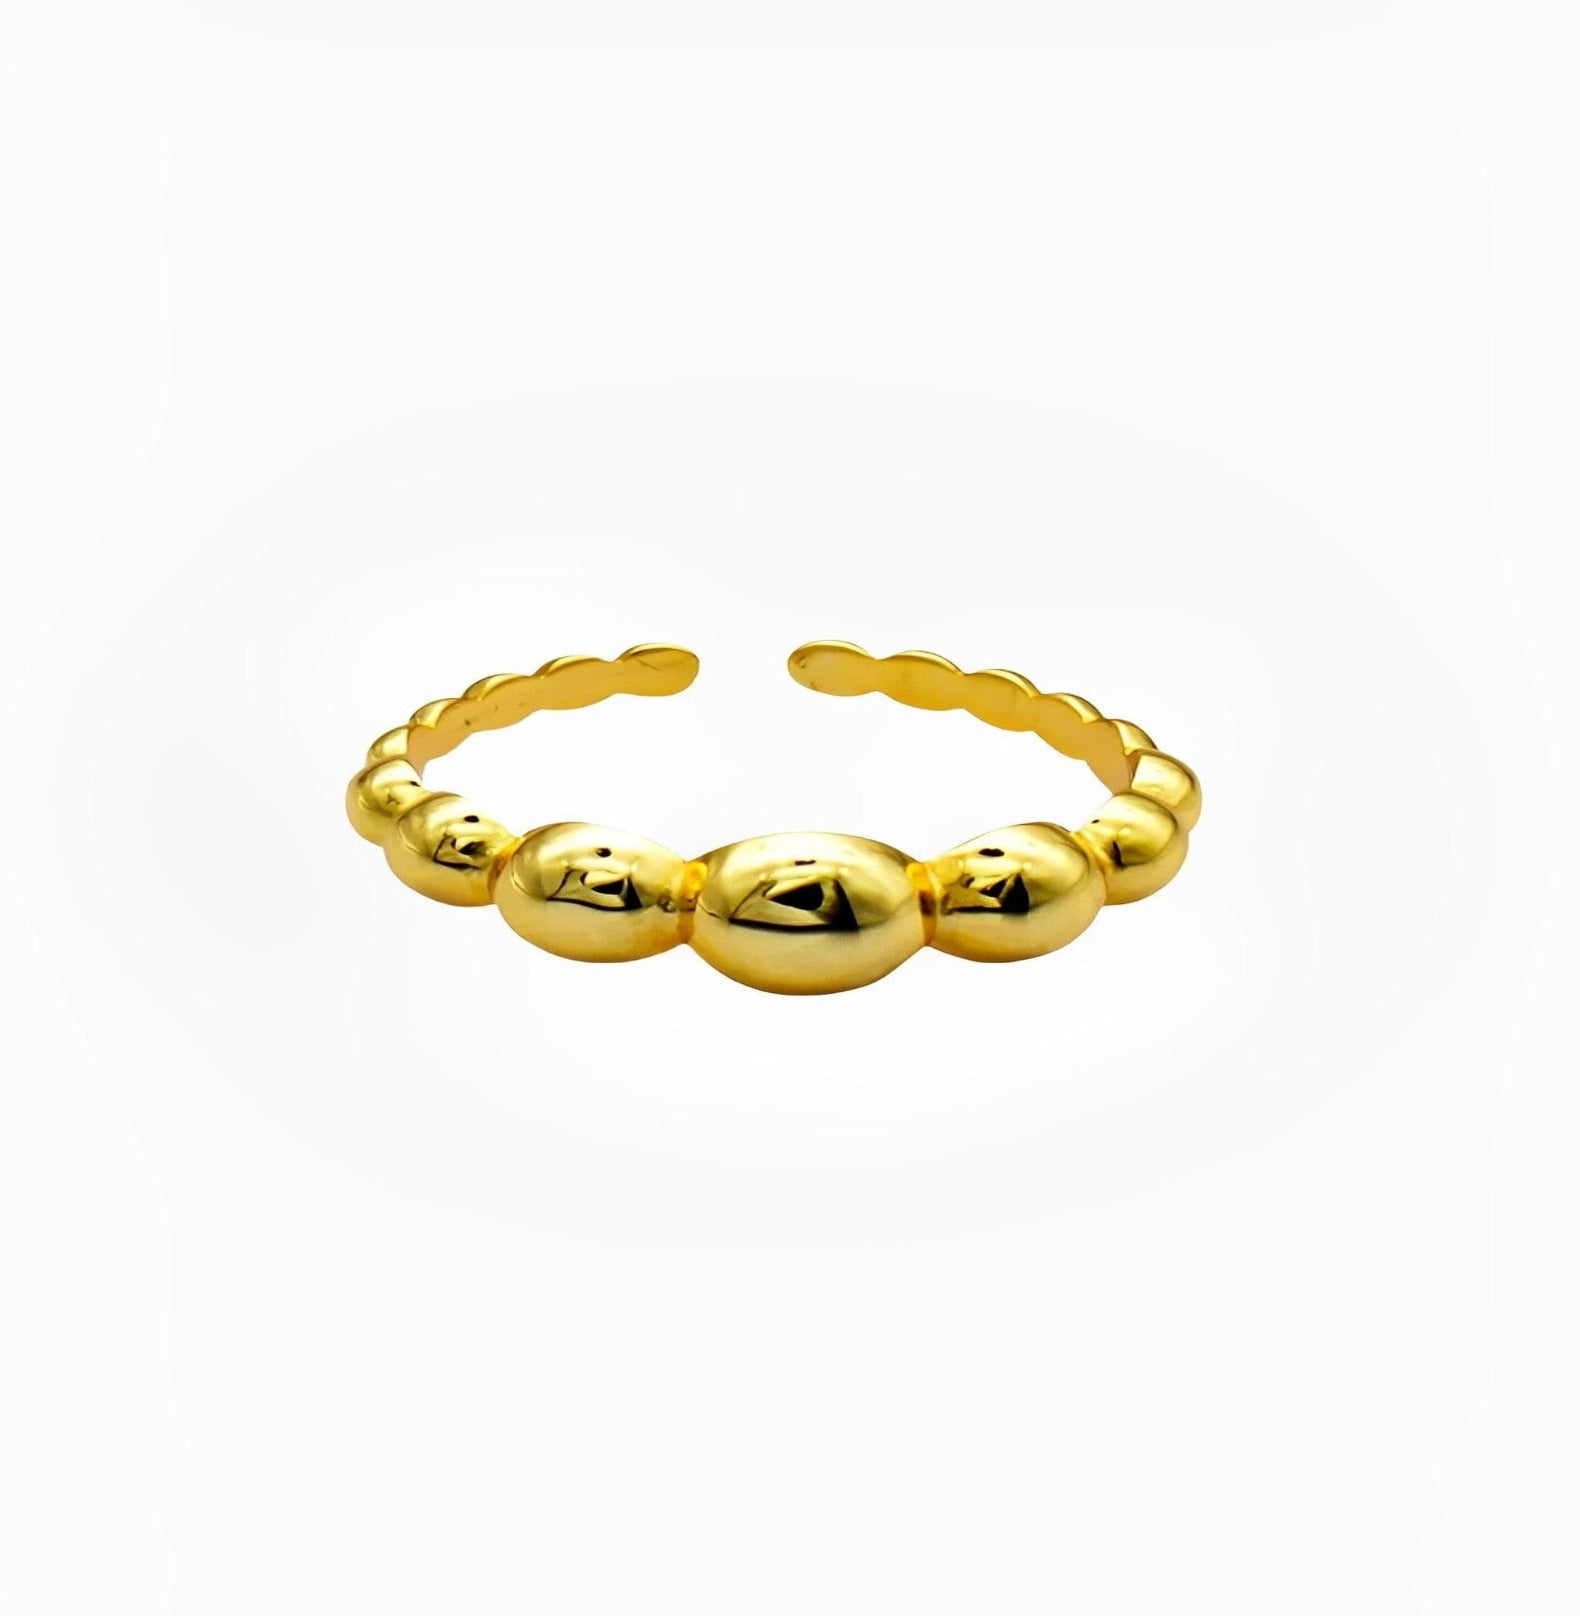 MARRIANE RING earing Yubama Jewelry Online Store - The Elegant Designs of Gold and Silver ! 